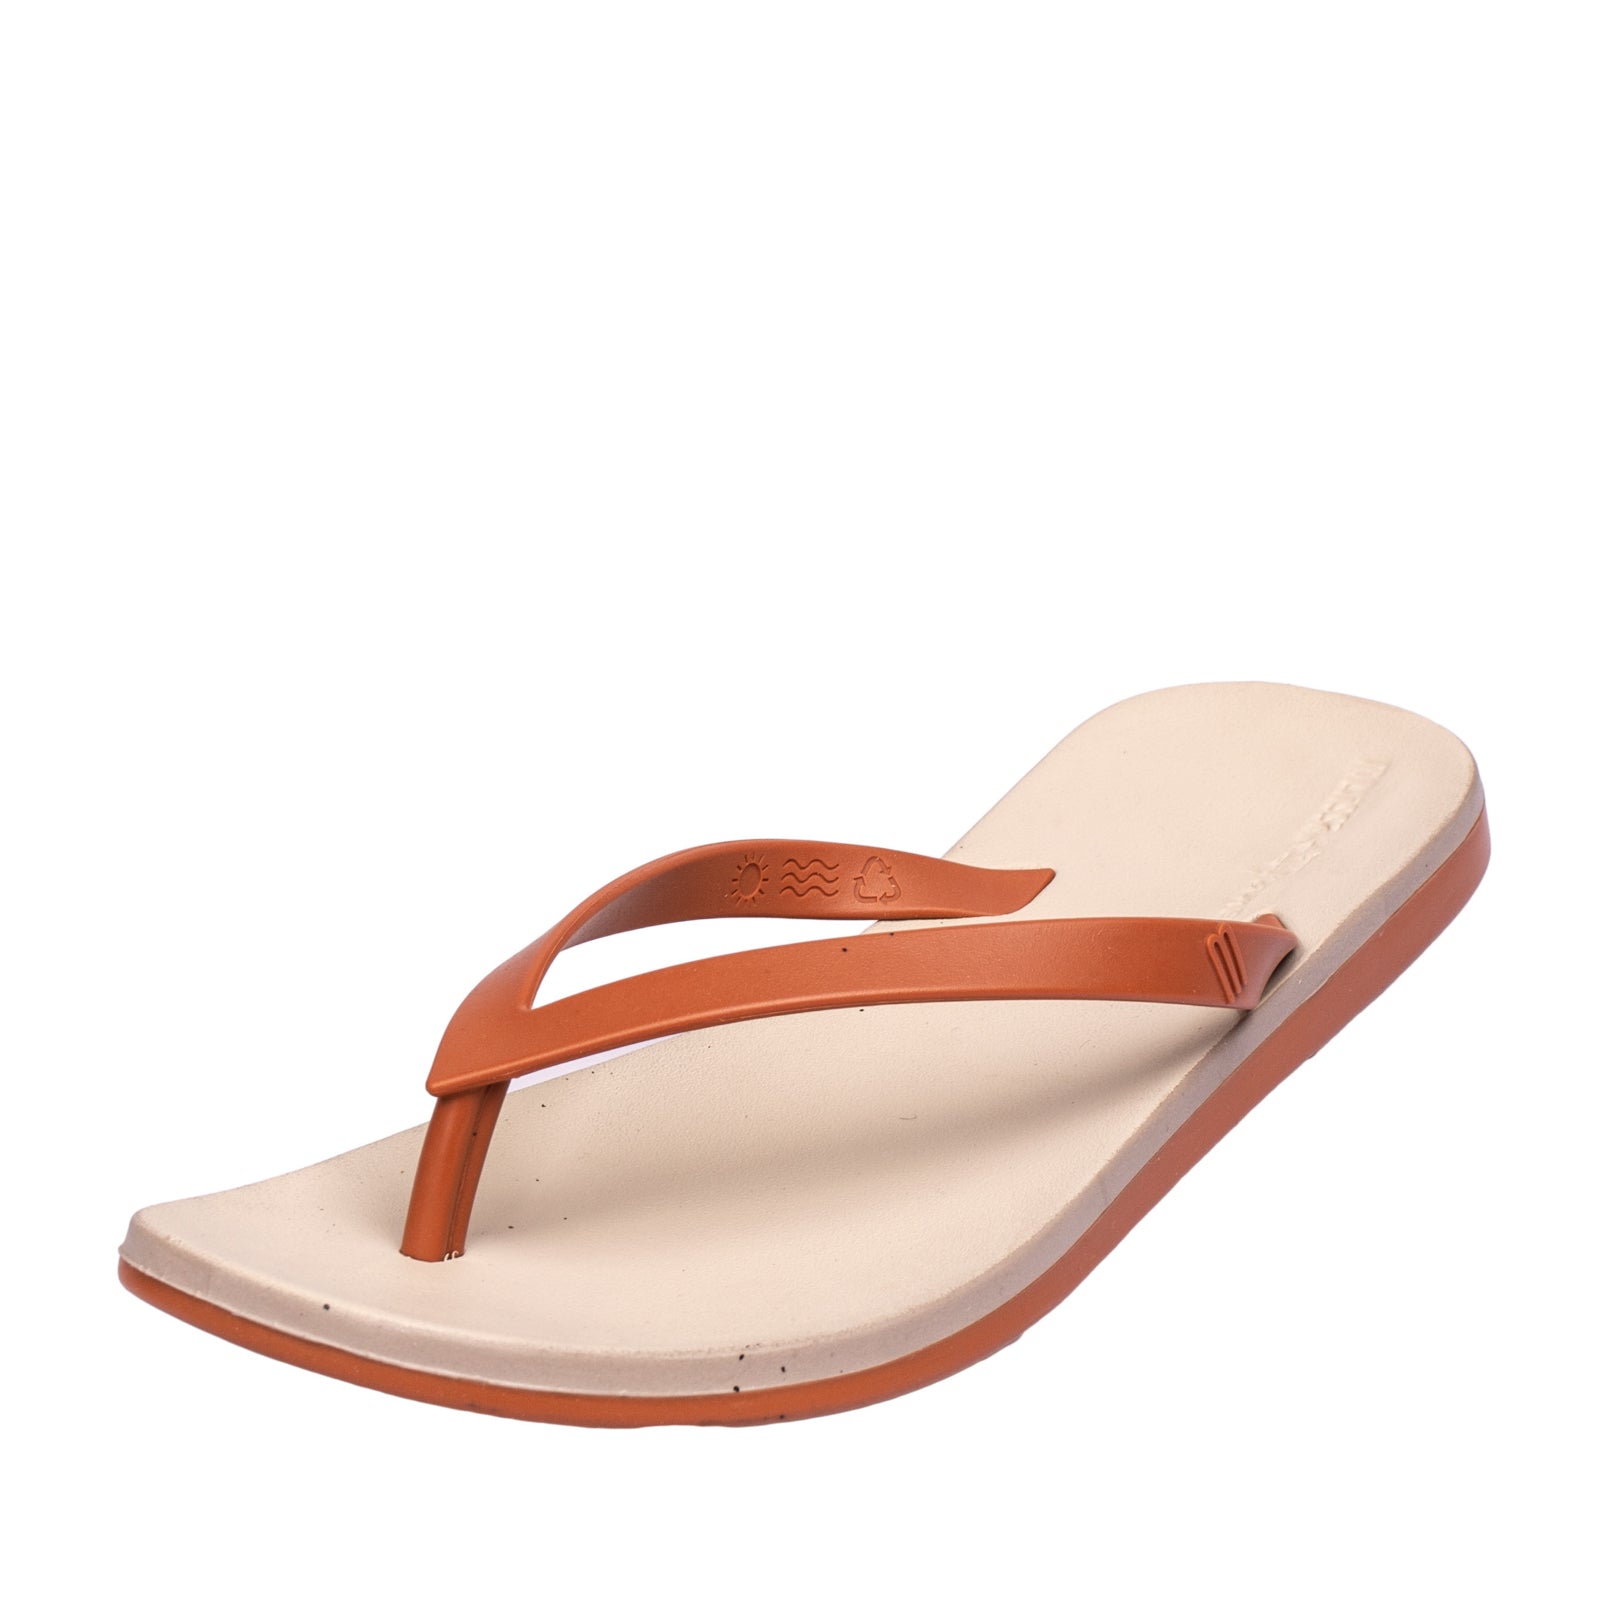 MELISSA + IPANEMA Flip Flop Sandals Size 37-38 UK 4-5 US 5-6 Rubber Two gallery main photo